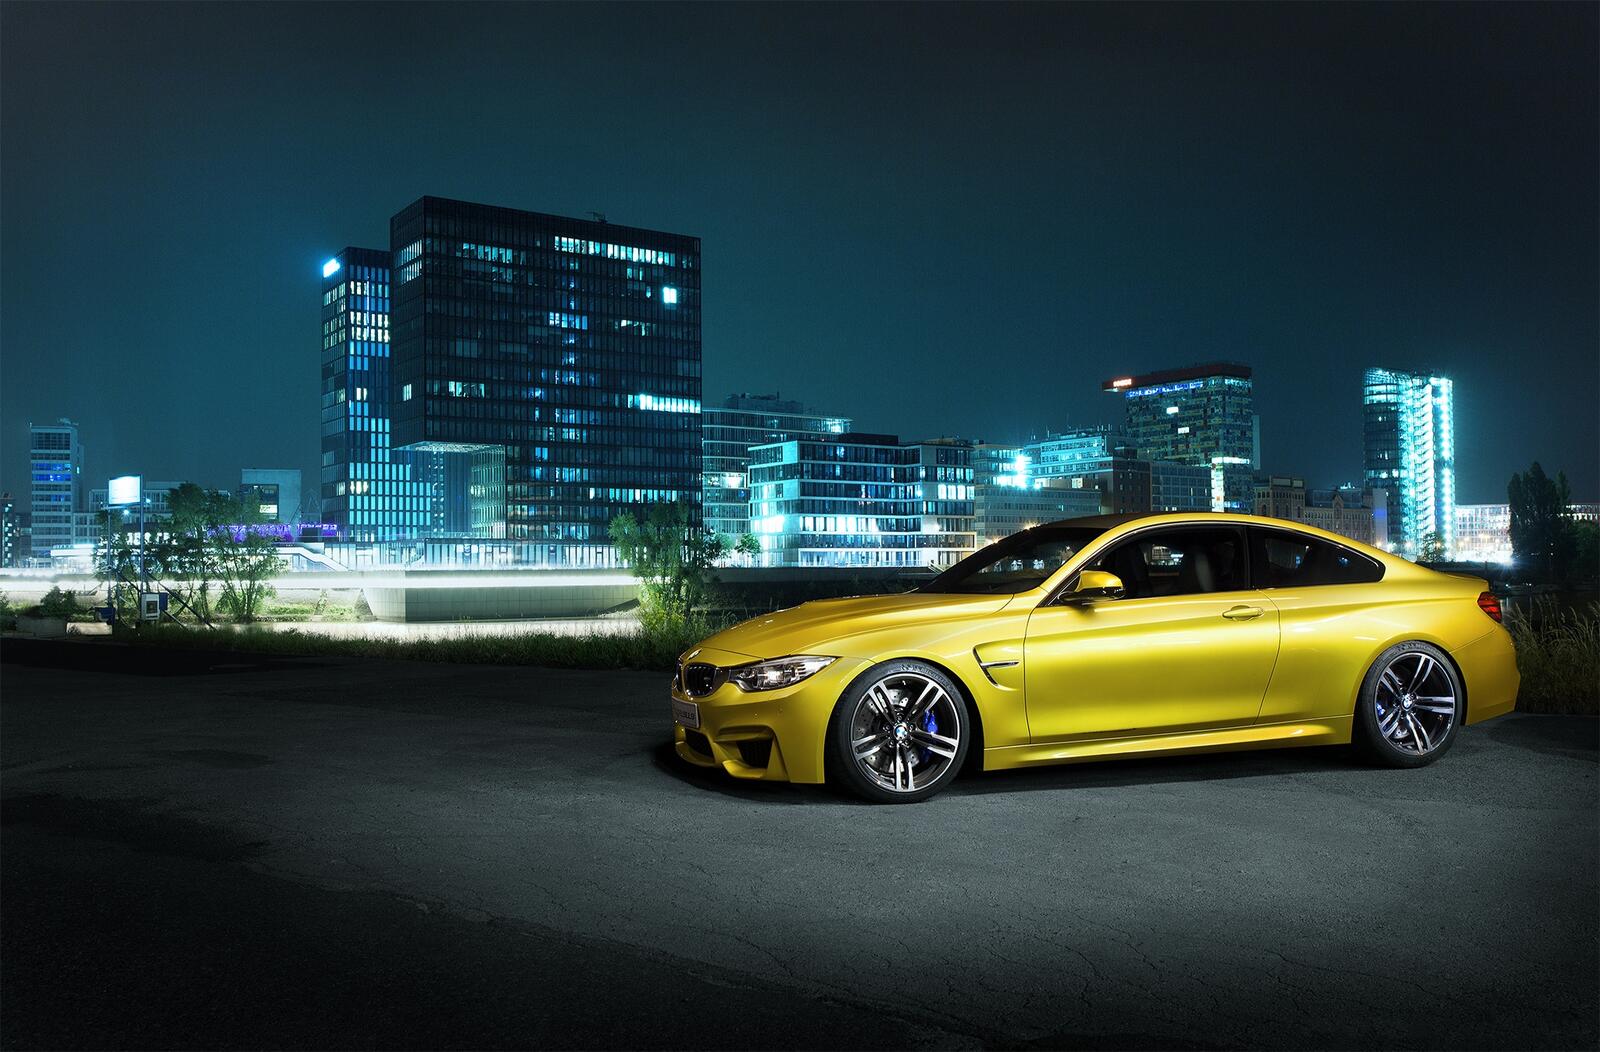 Free photo A gold BMW F82 M4 stands against the backdrop of a city at night